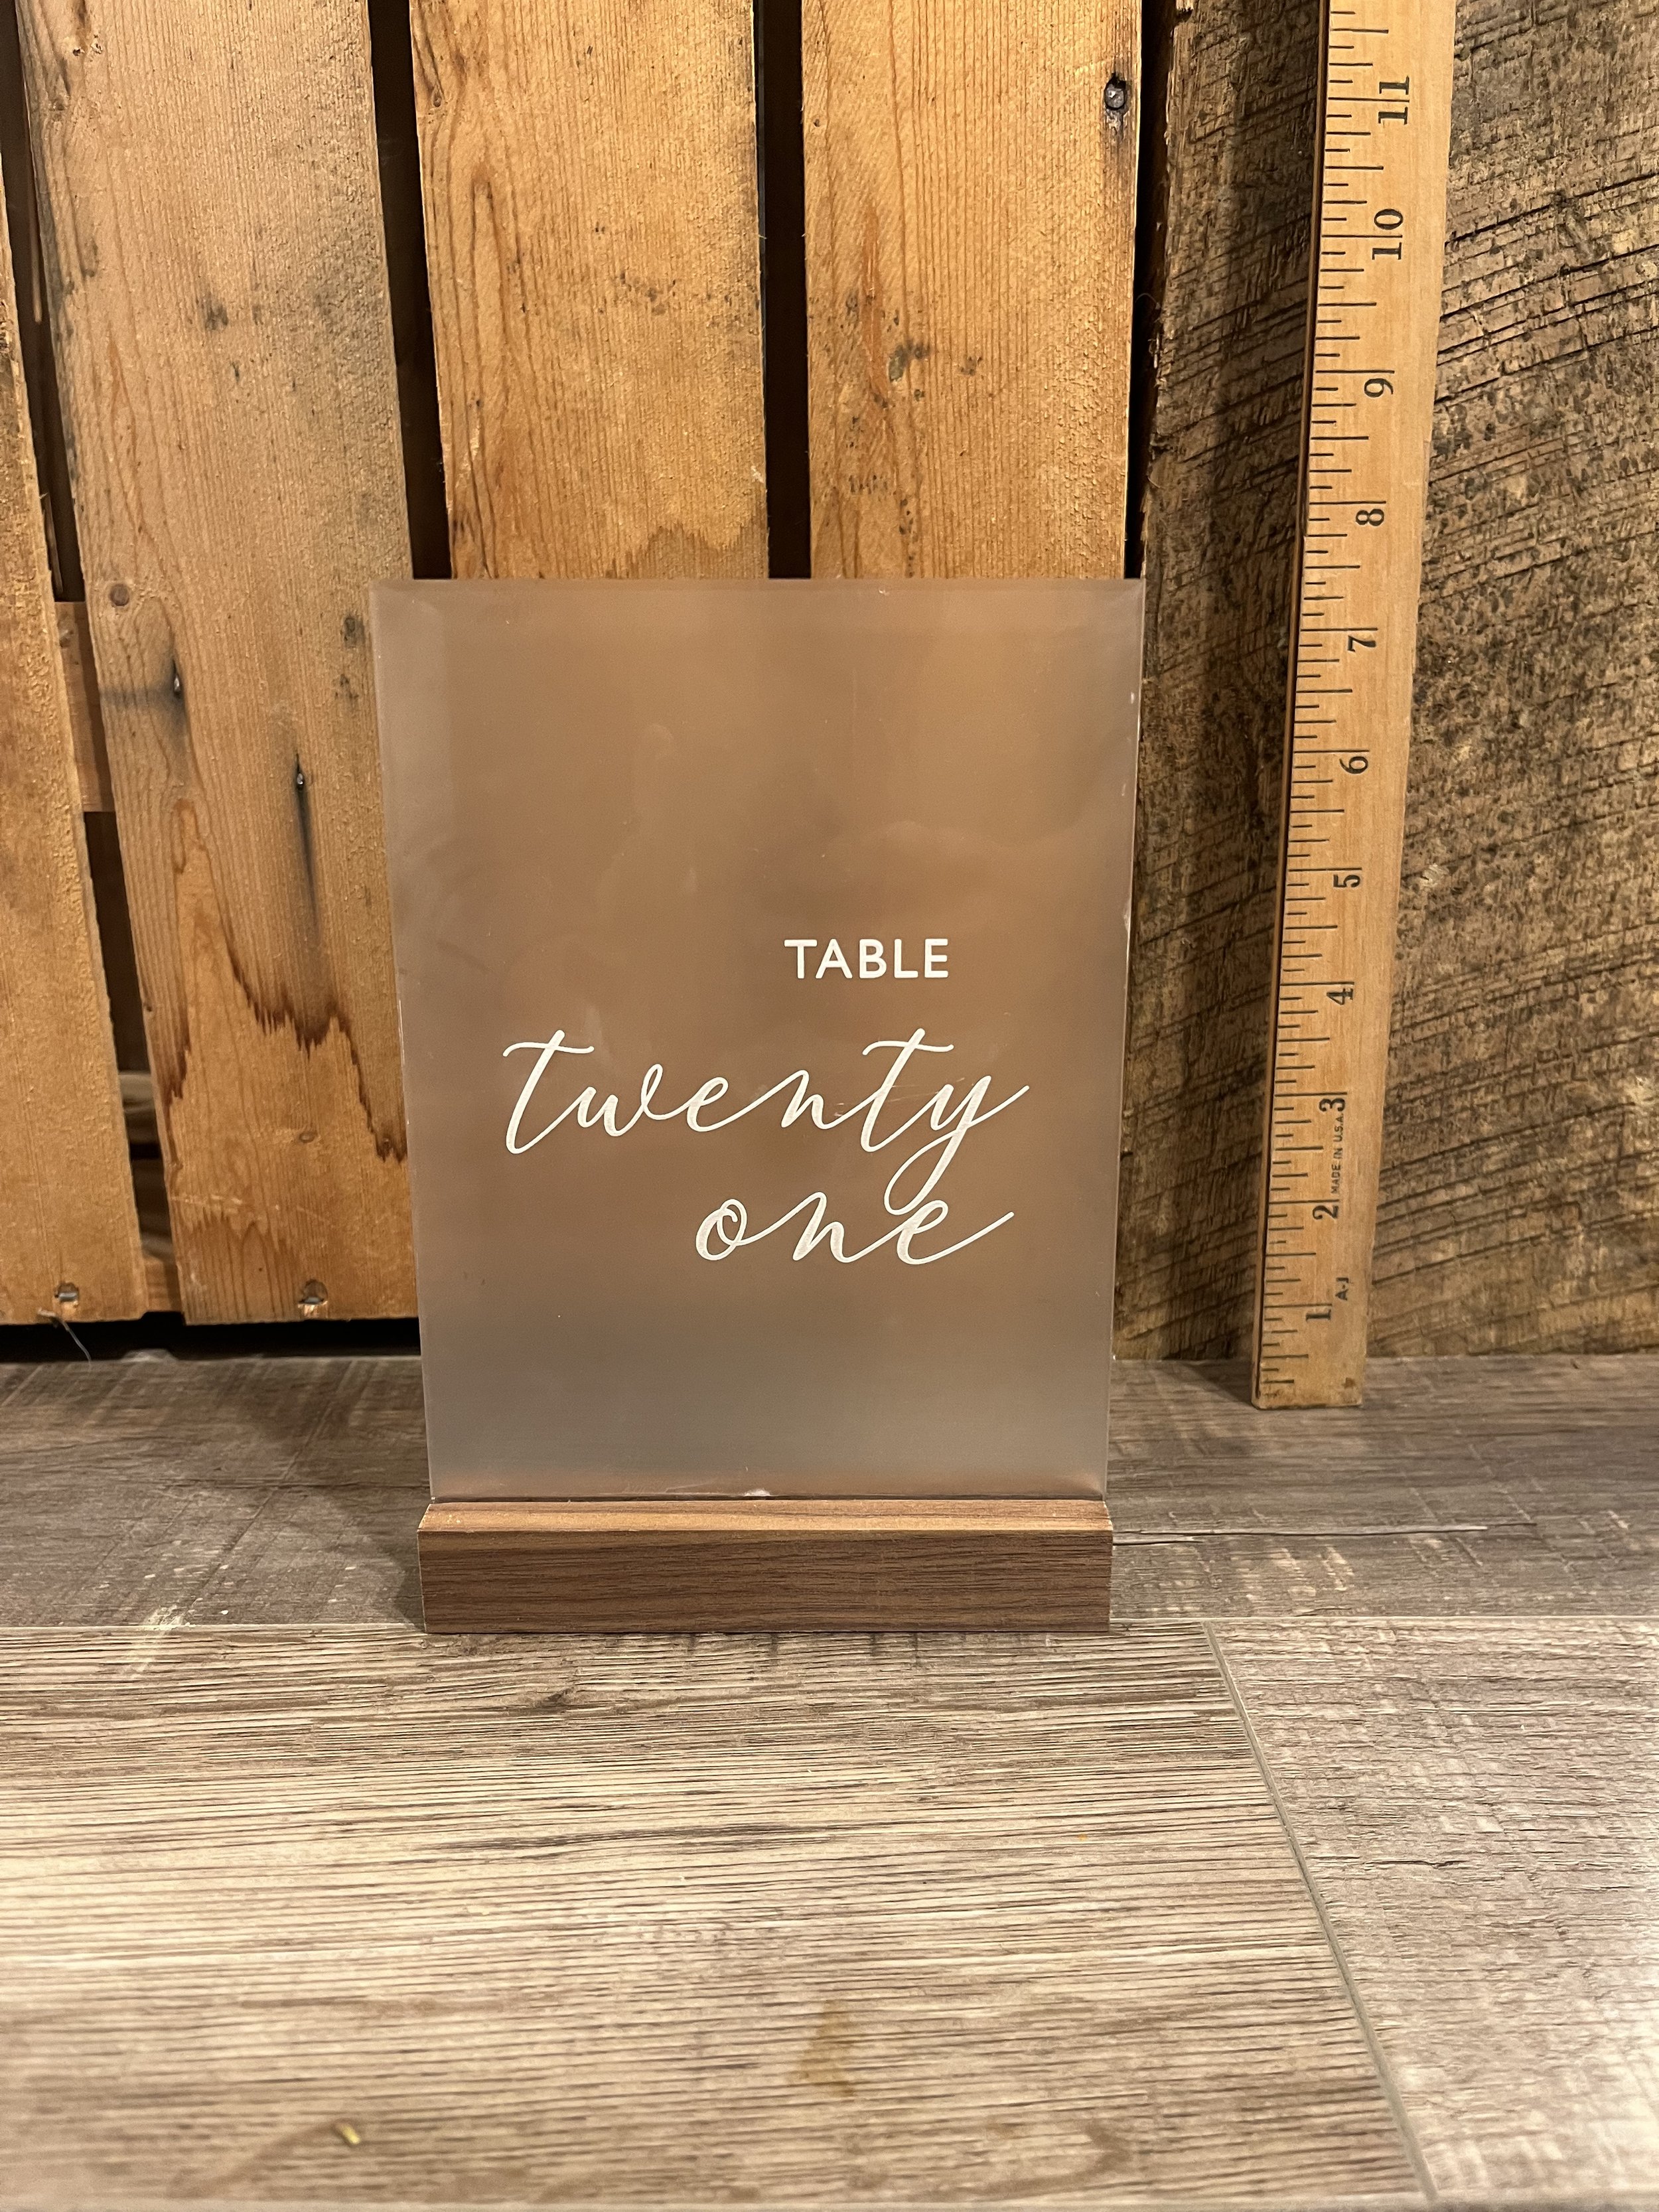 Table Numbers 1-23